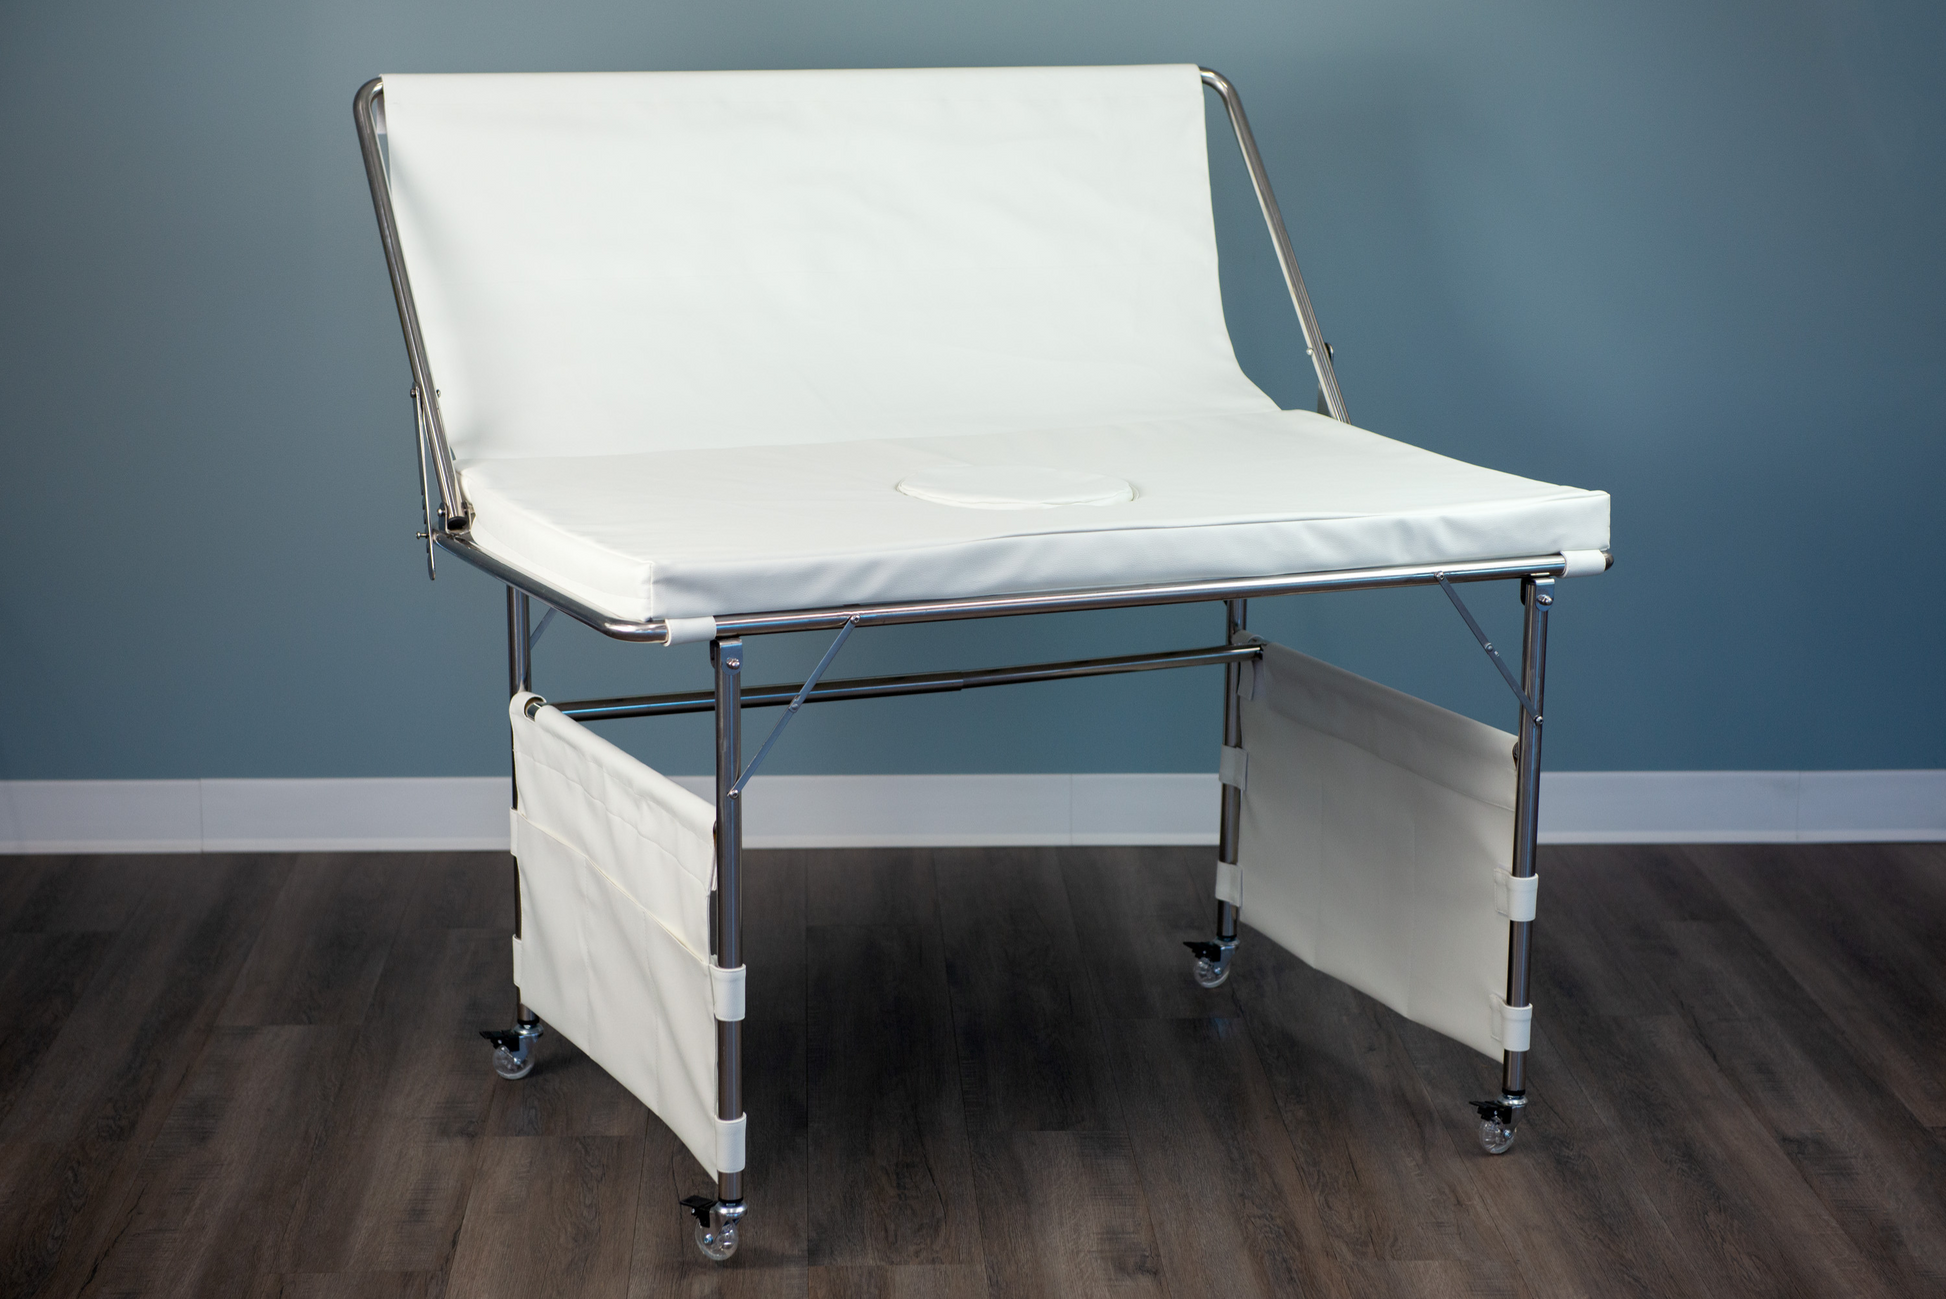 Unlike Paloma Schell Easy Table, we ship this posing table for newborn photography super-fast from California USA the same day you order.